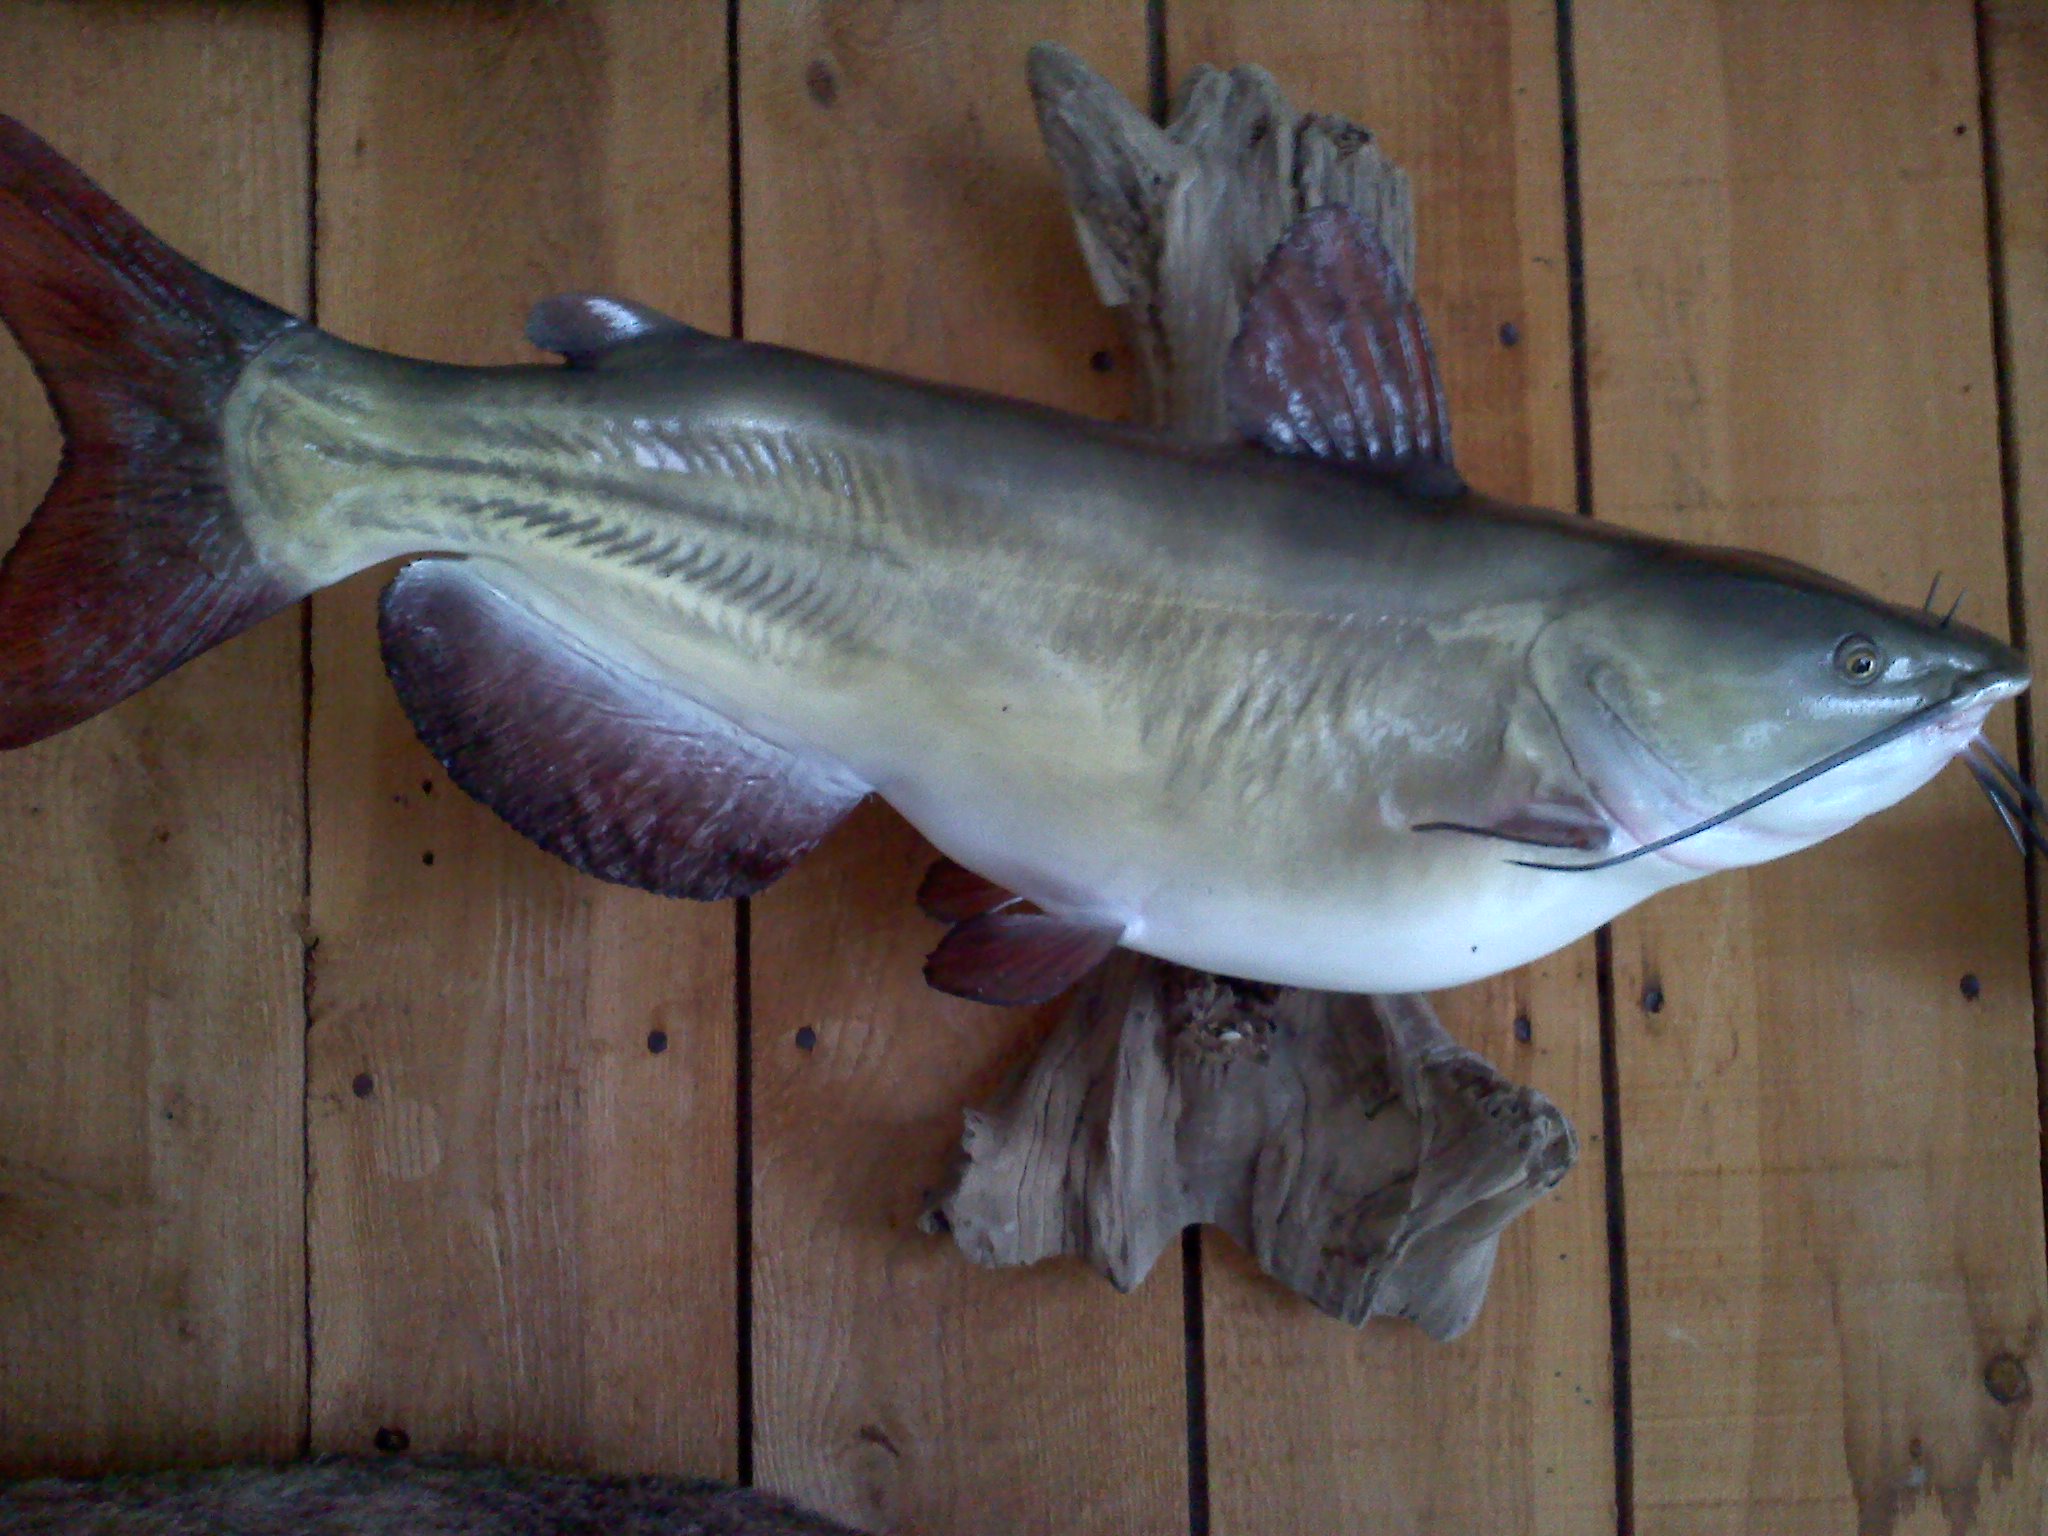 Reproduction Channel Catfish